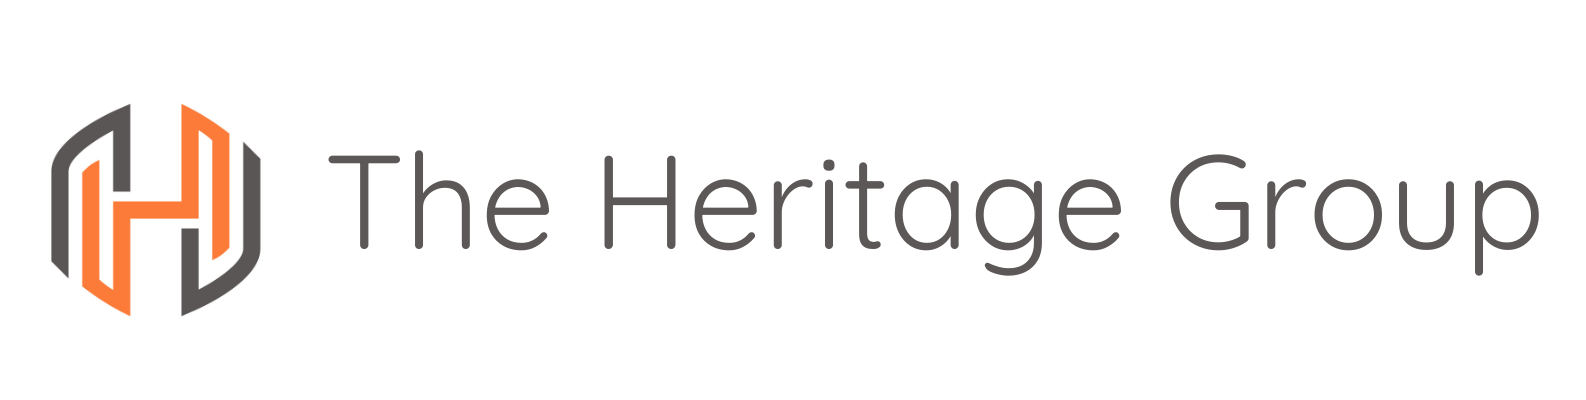 Partner with The Heritage Group - Walmart.com solution provider page